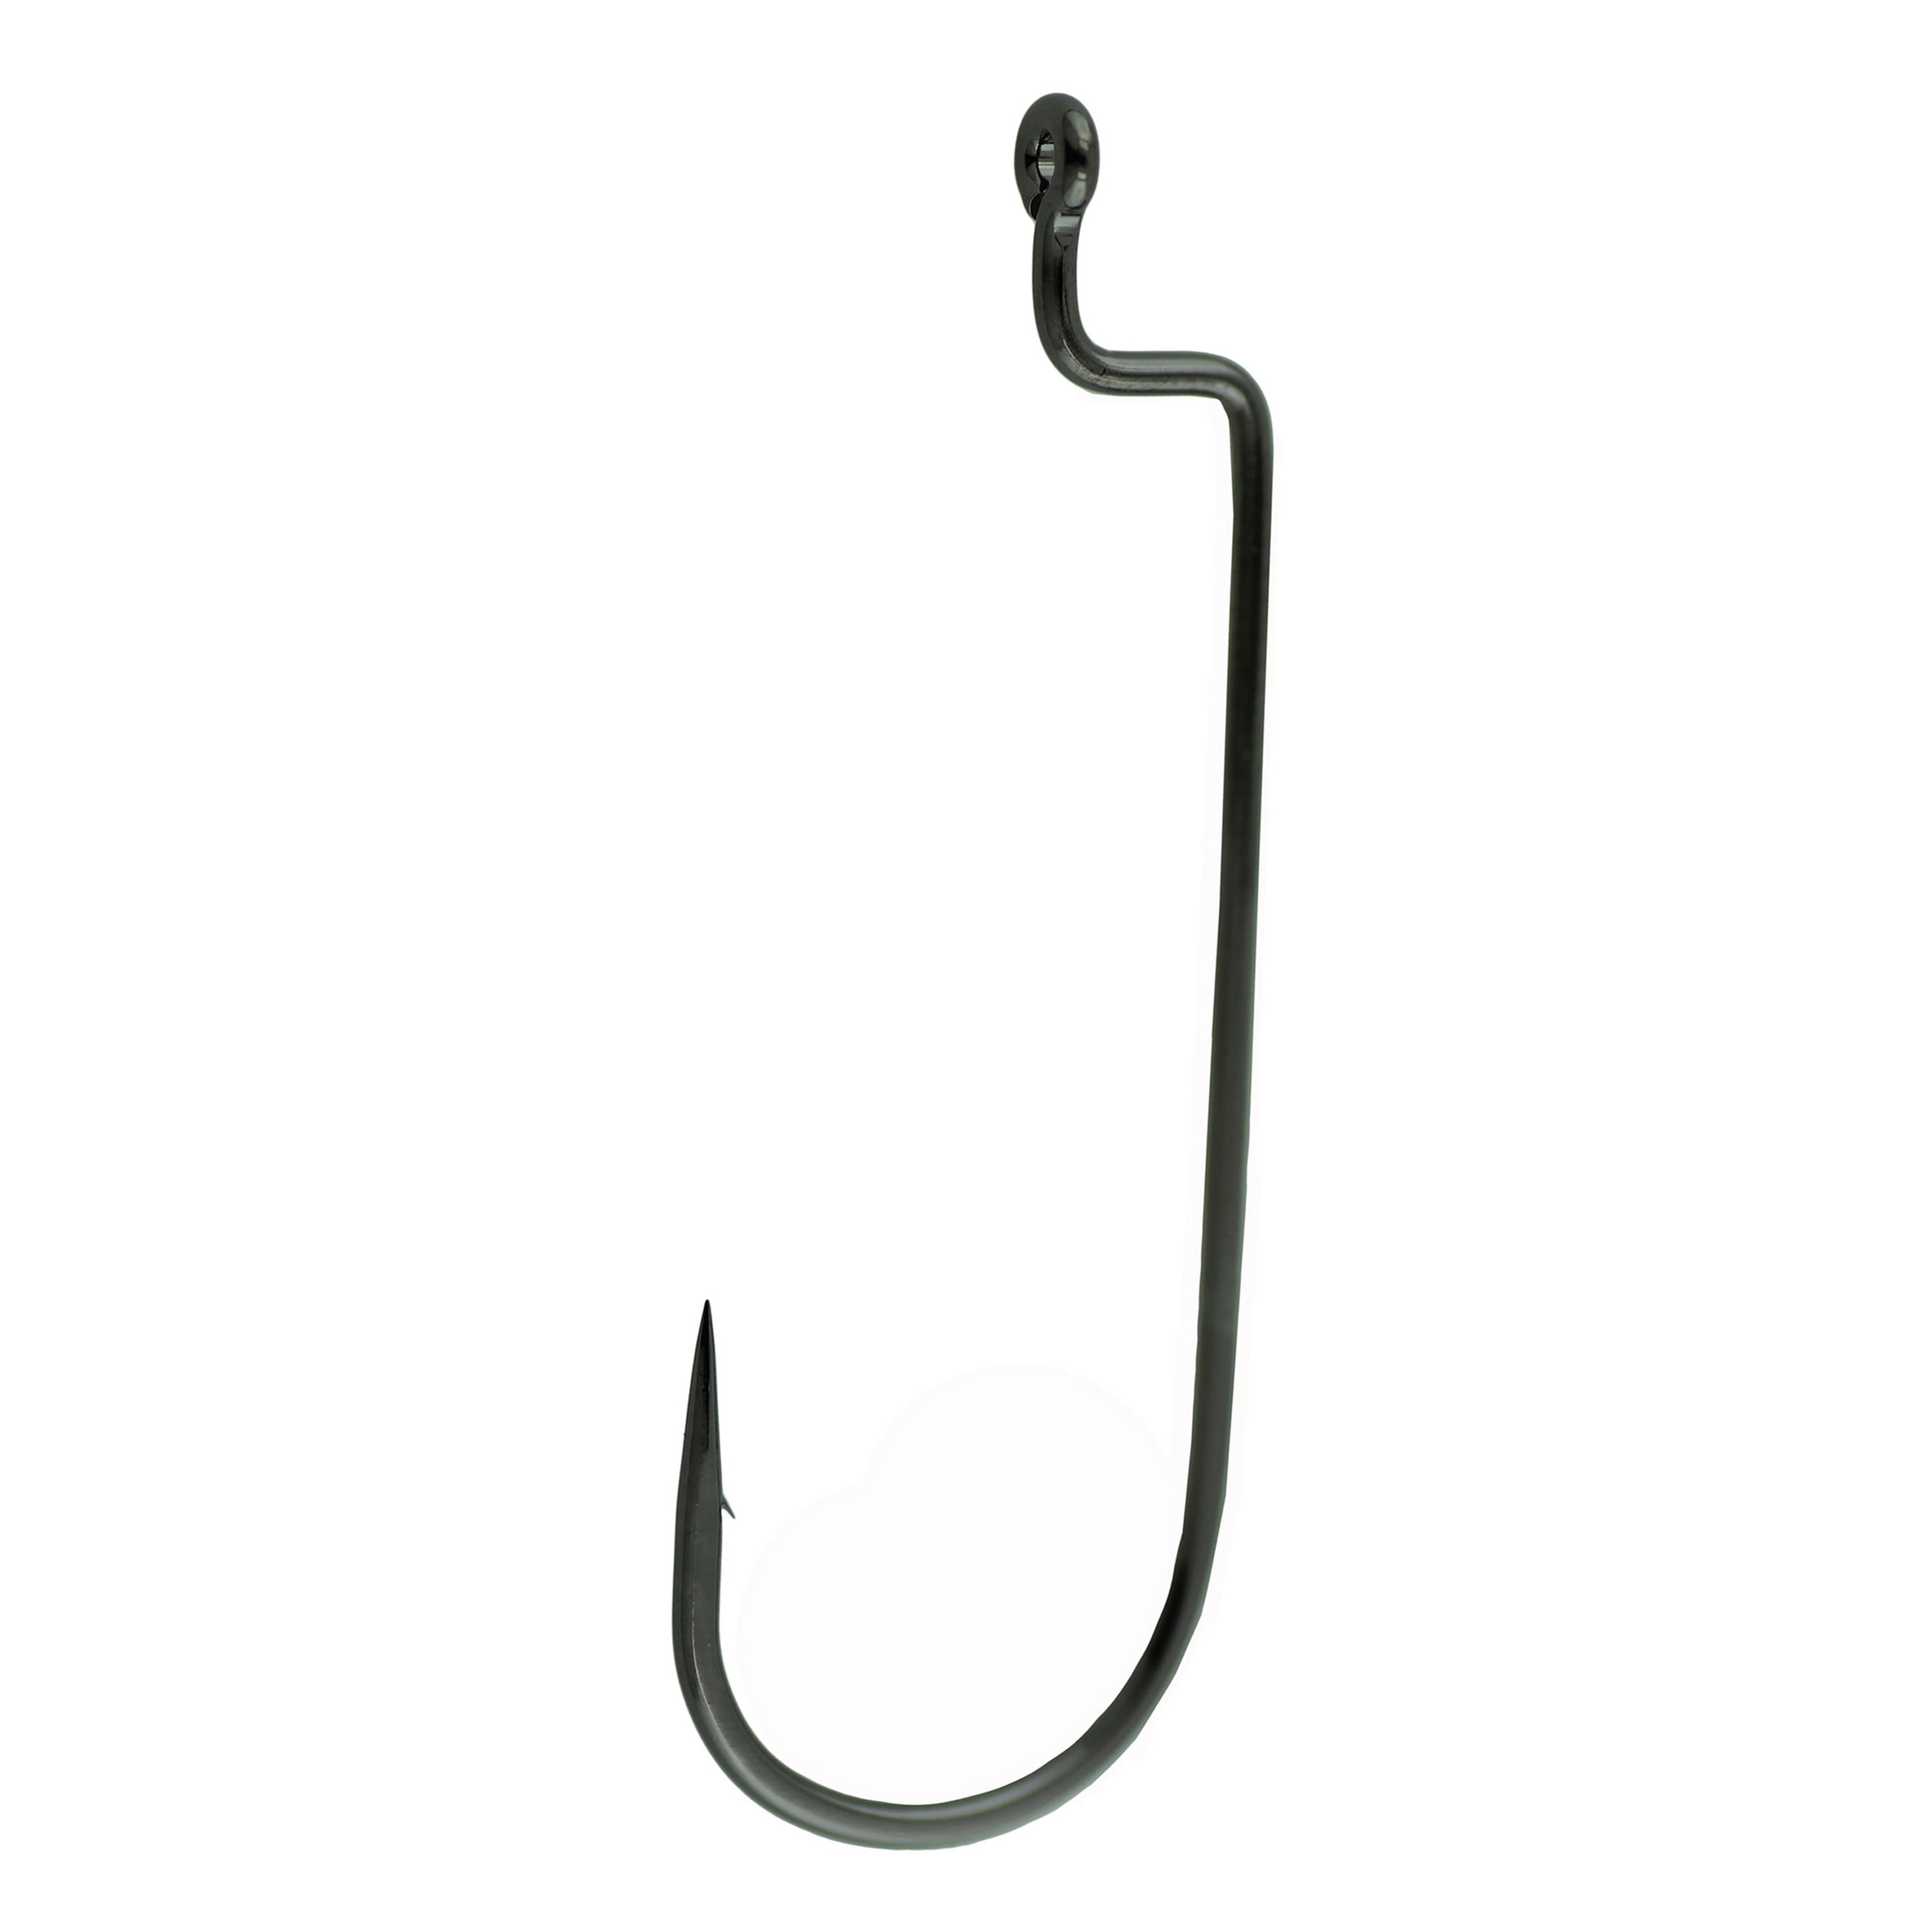 Gamakatsu Worm Offset Round Bend Hook in High Quality Carbon Steel, NS  Black, Size 4/0, 5-Pack 